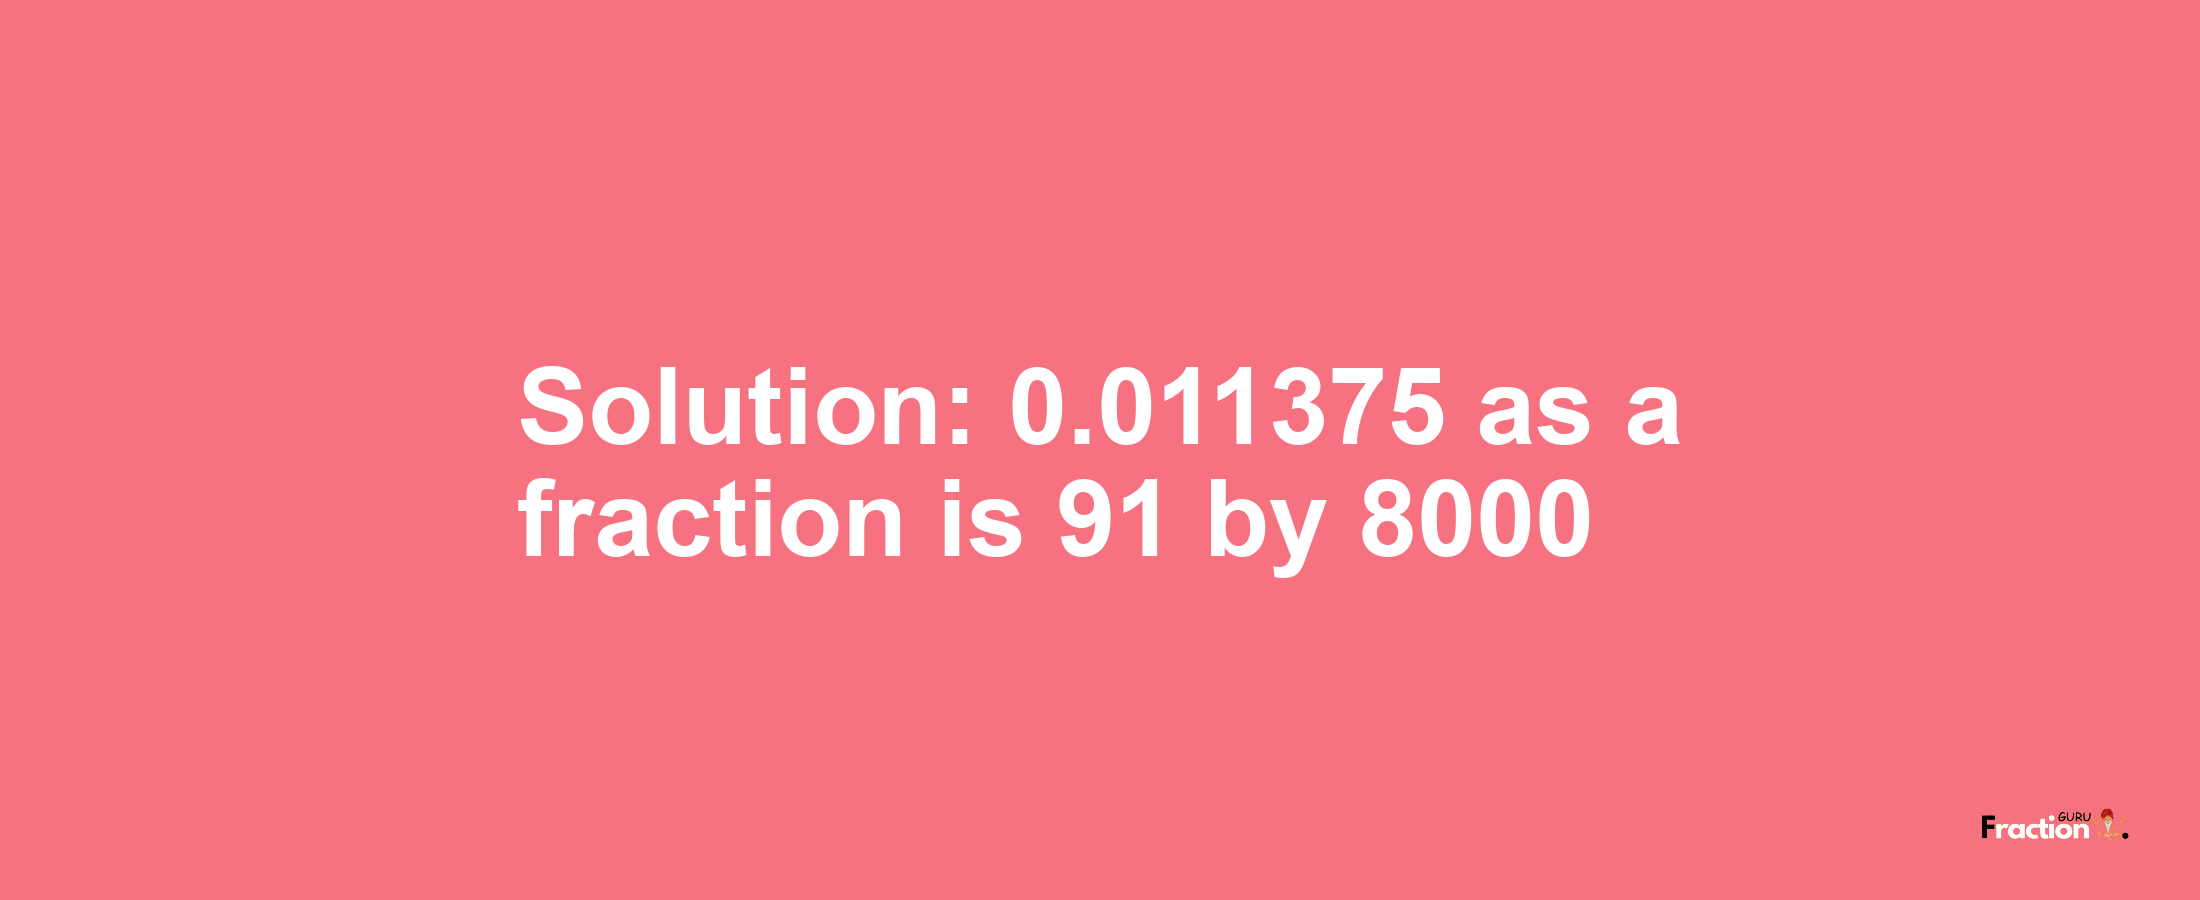 Solution:0.011375 as a fraction is 91/8000